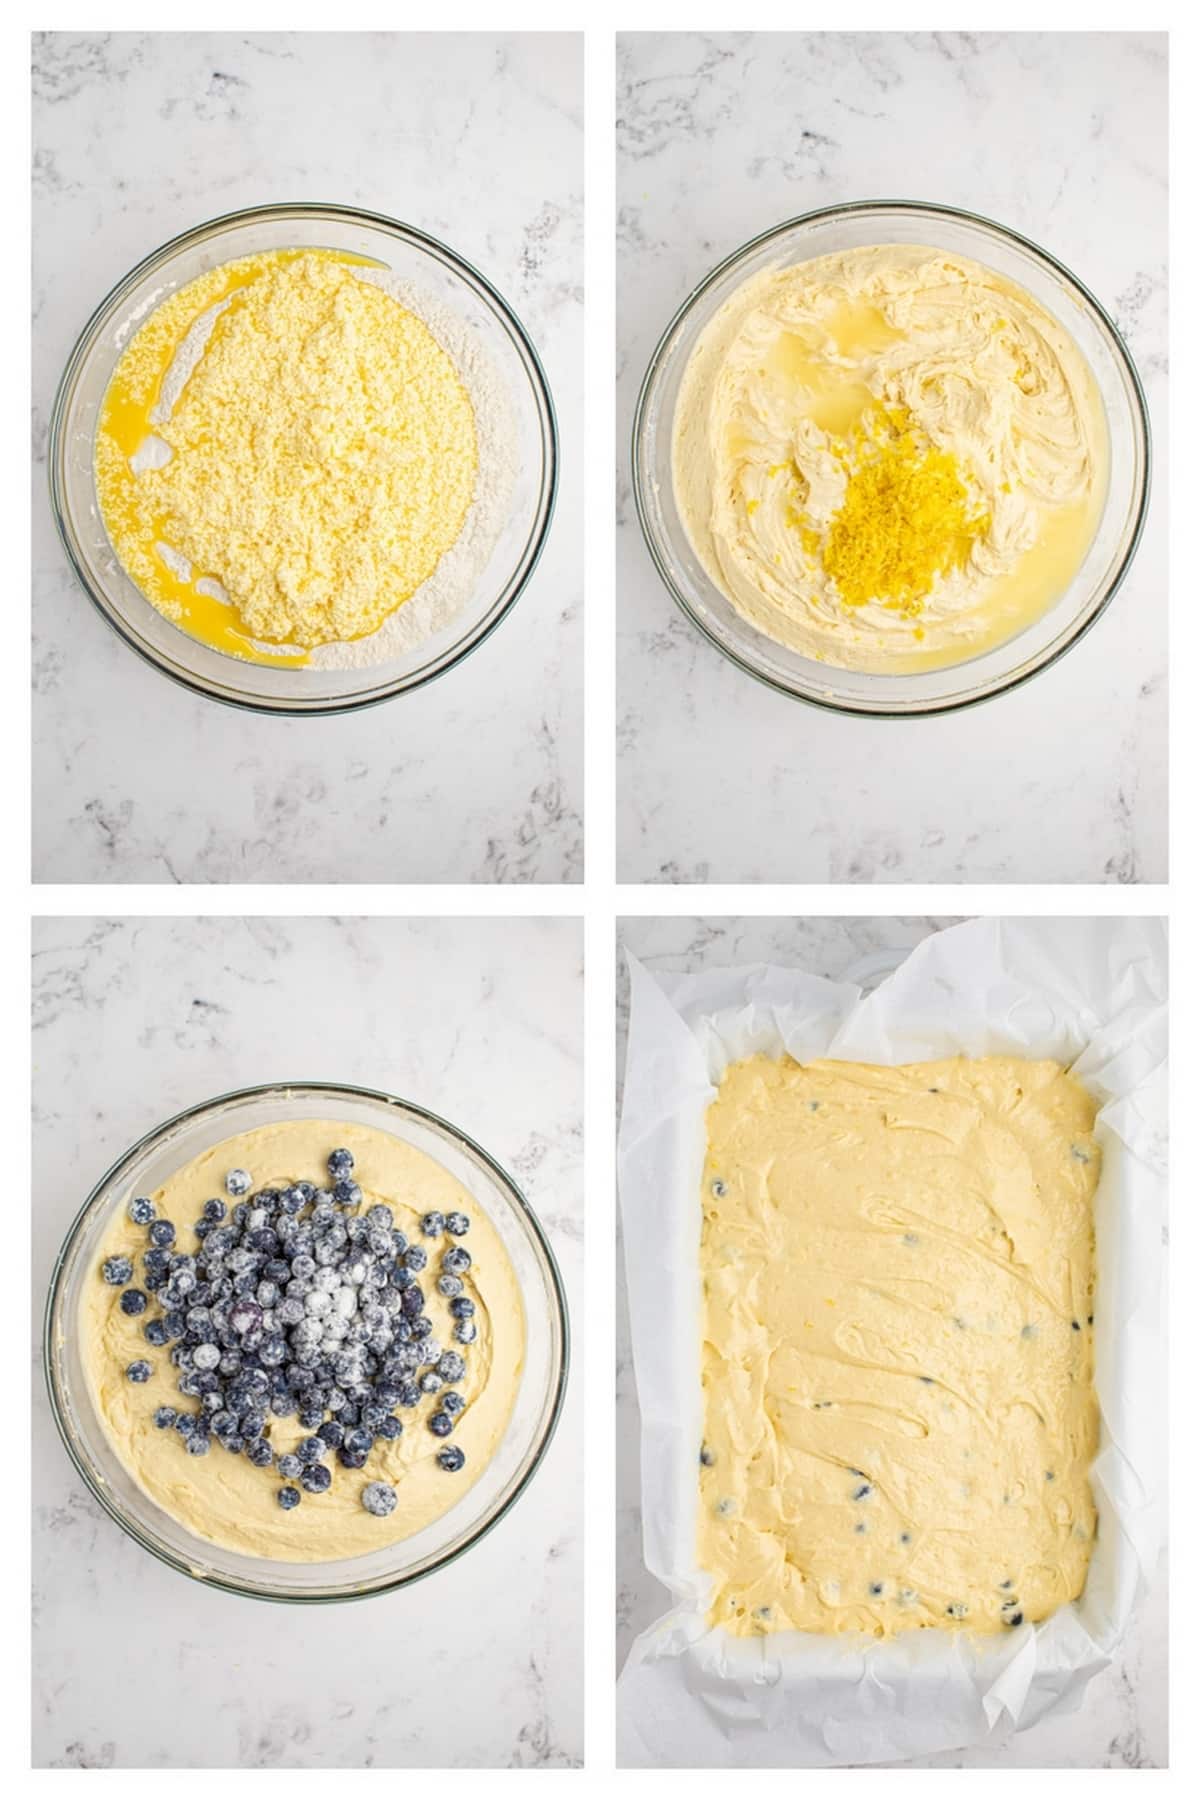 how to make a cake with lemon and blueberries